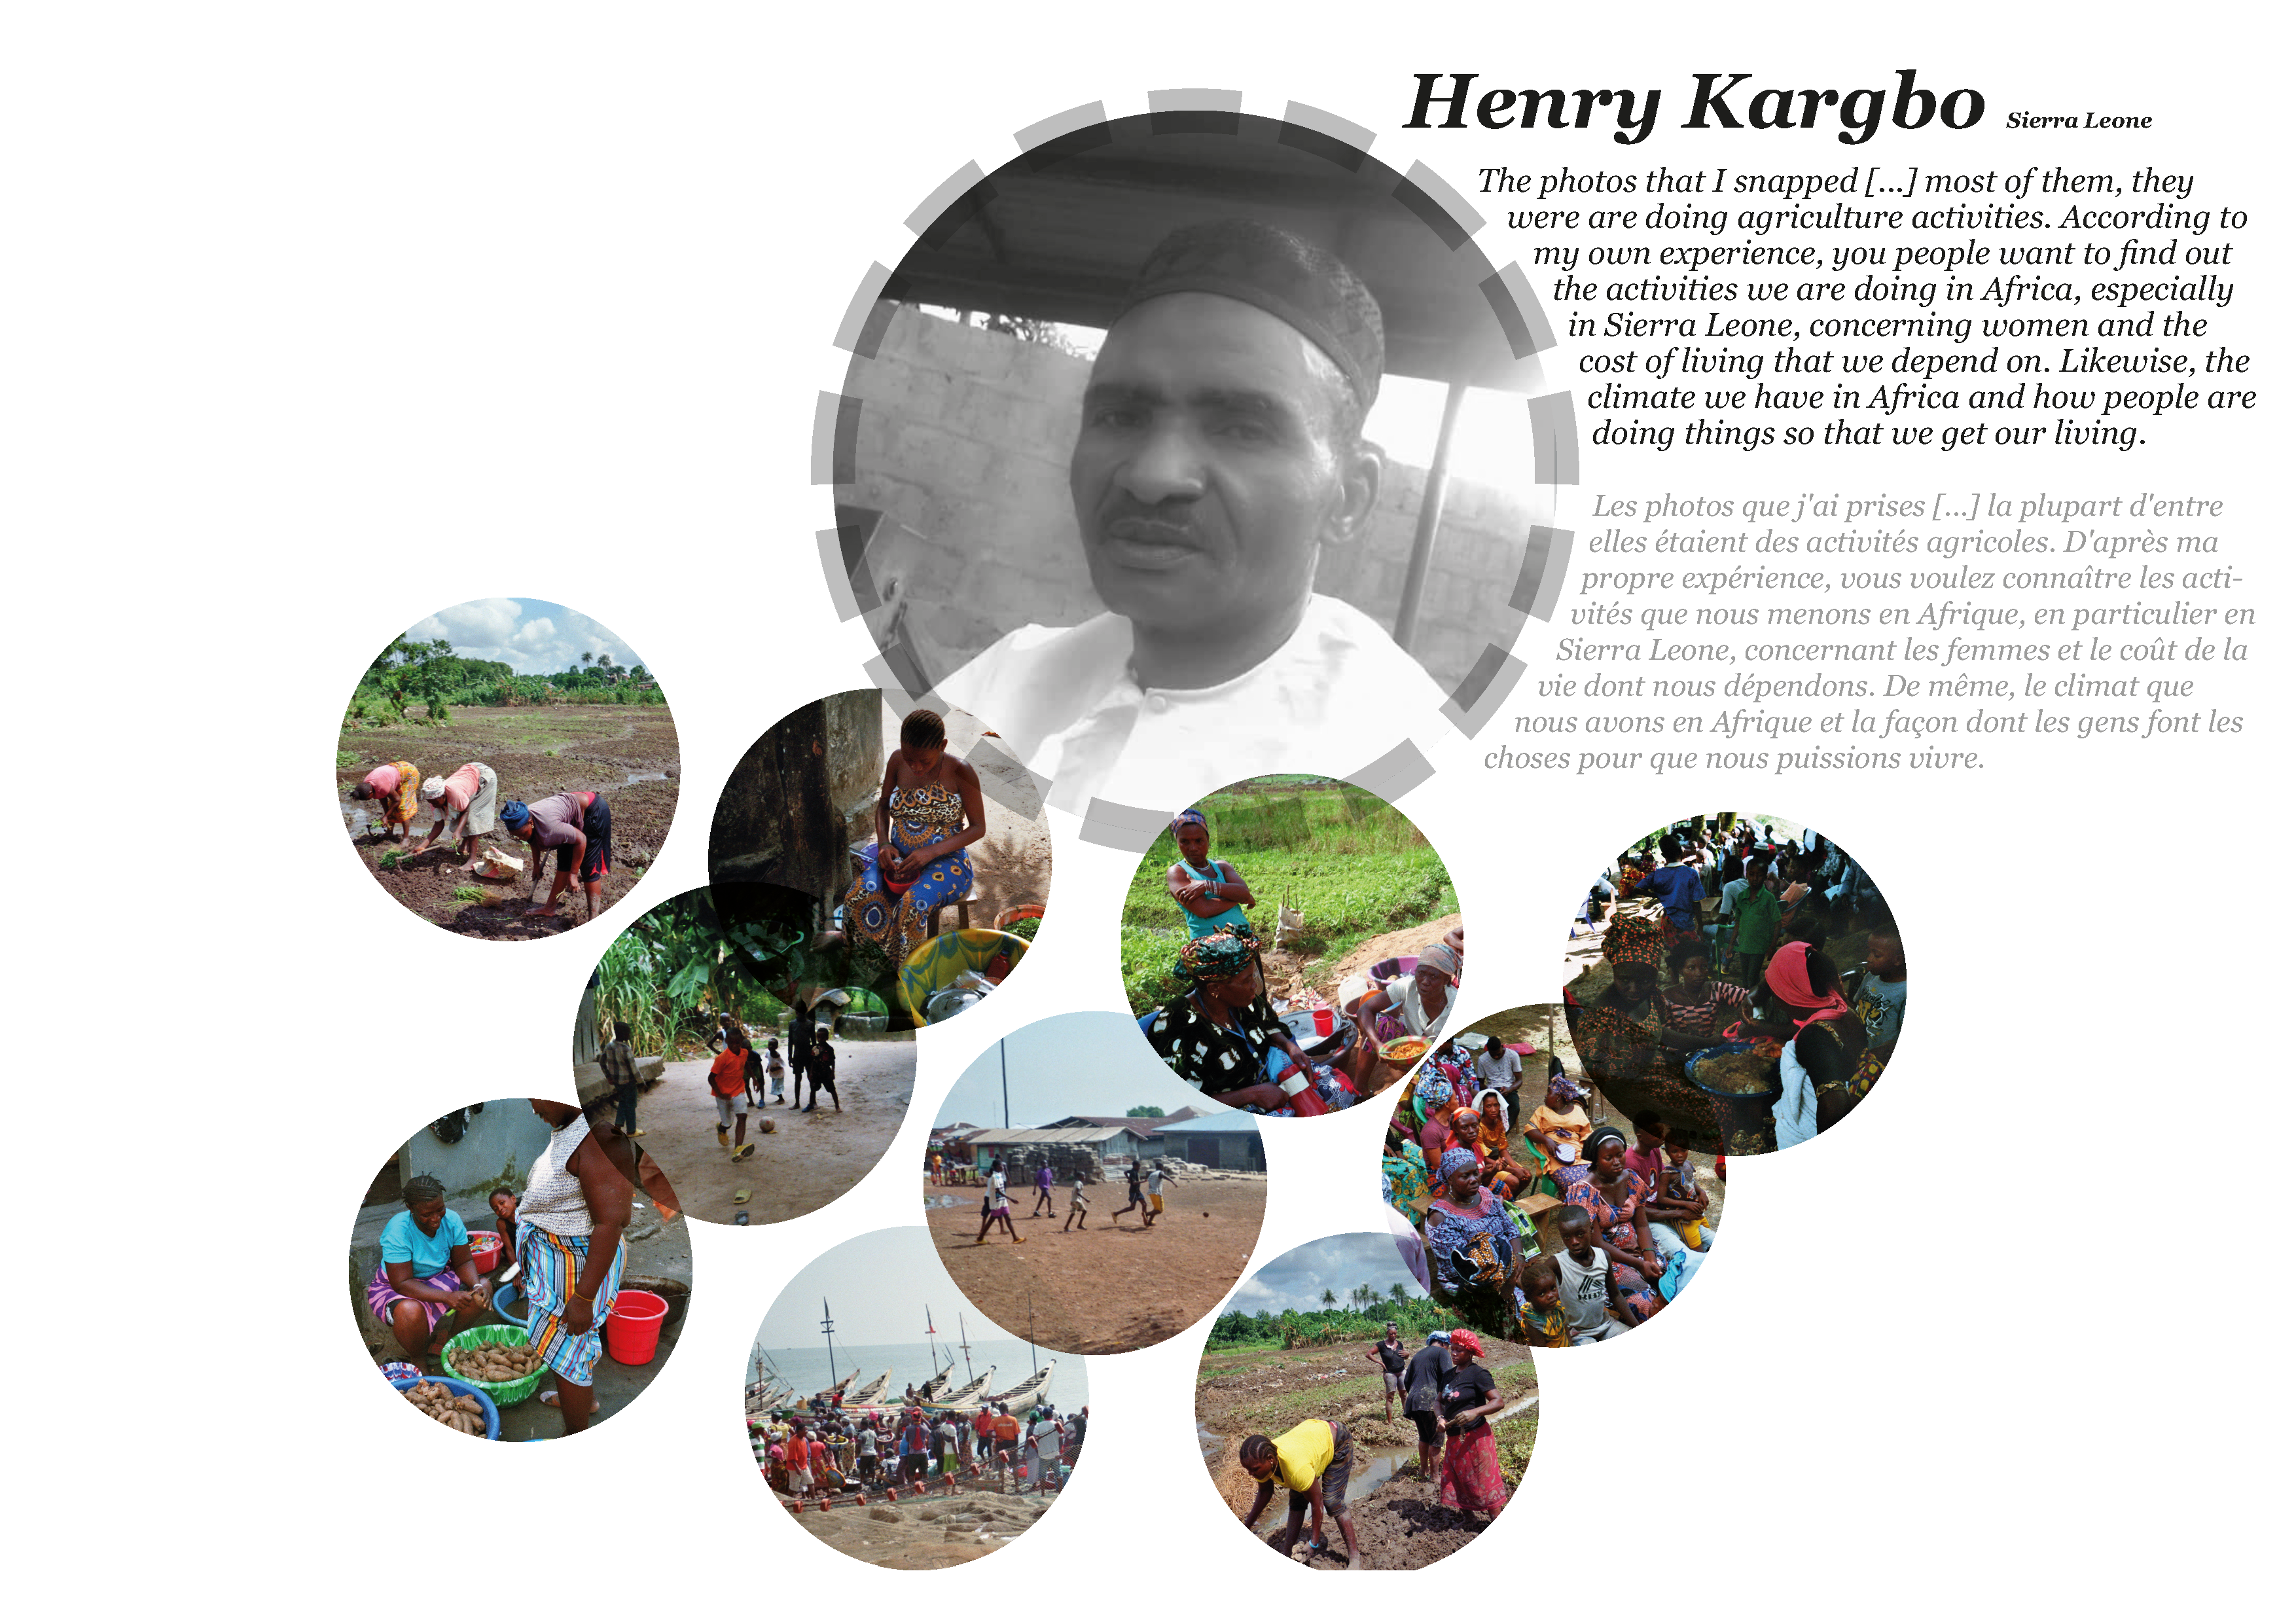 Collage of pictures of religion and peace by Henry Kargbo in Sierra Leone